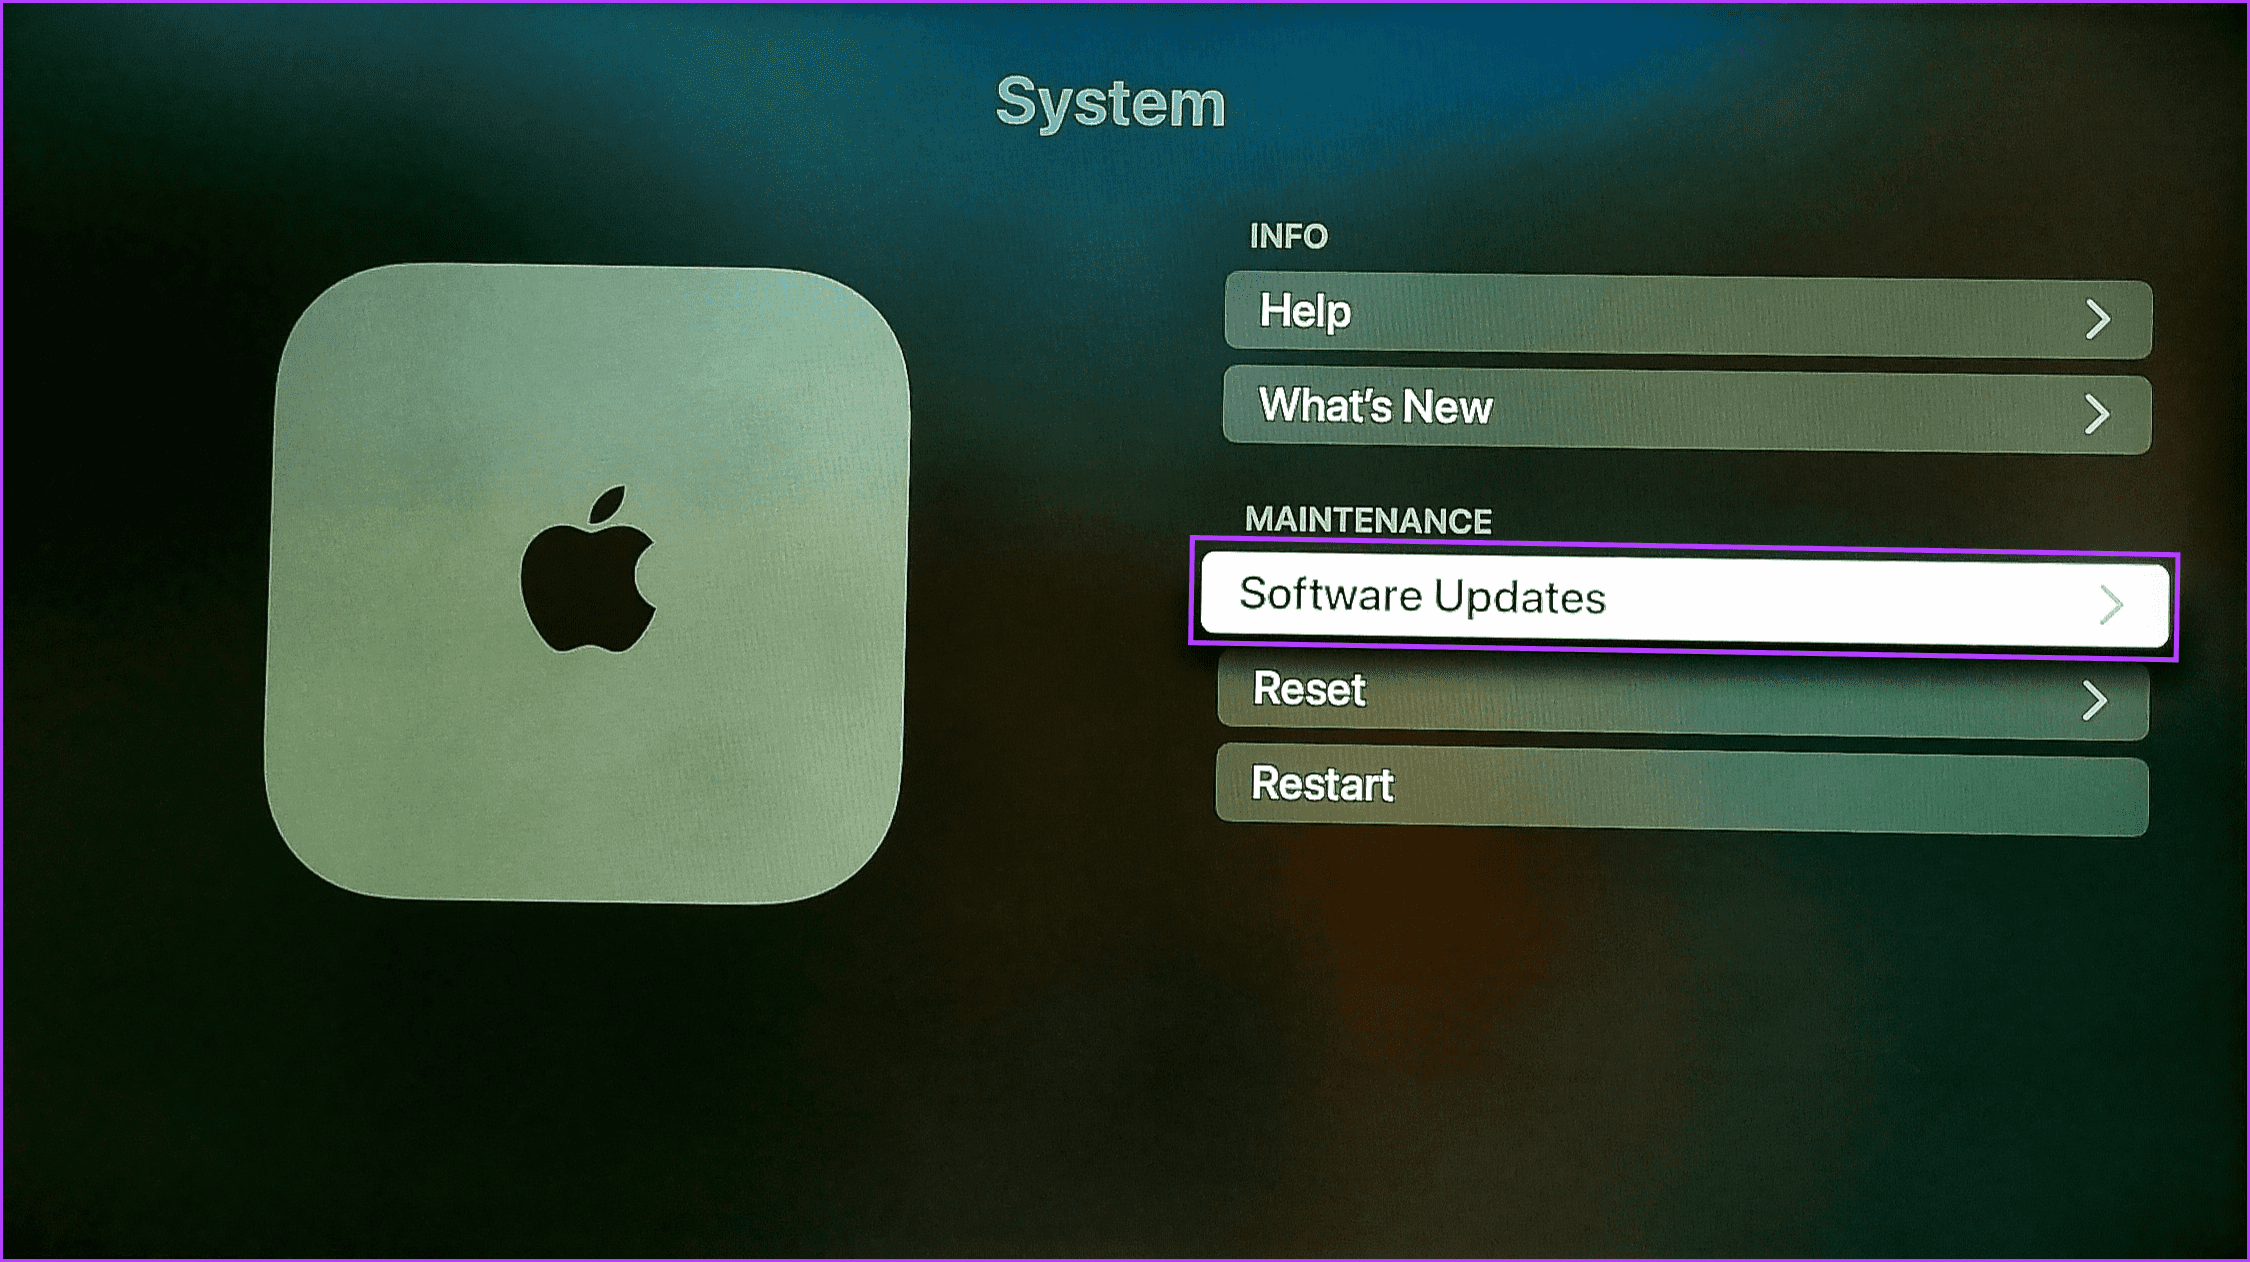 Select Software Updates